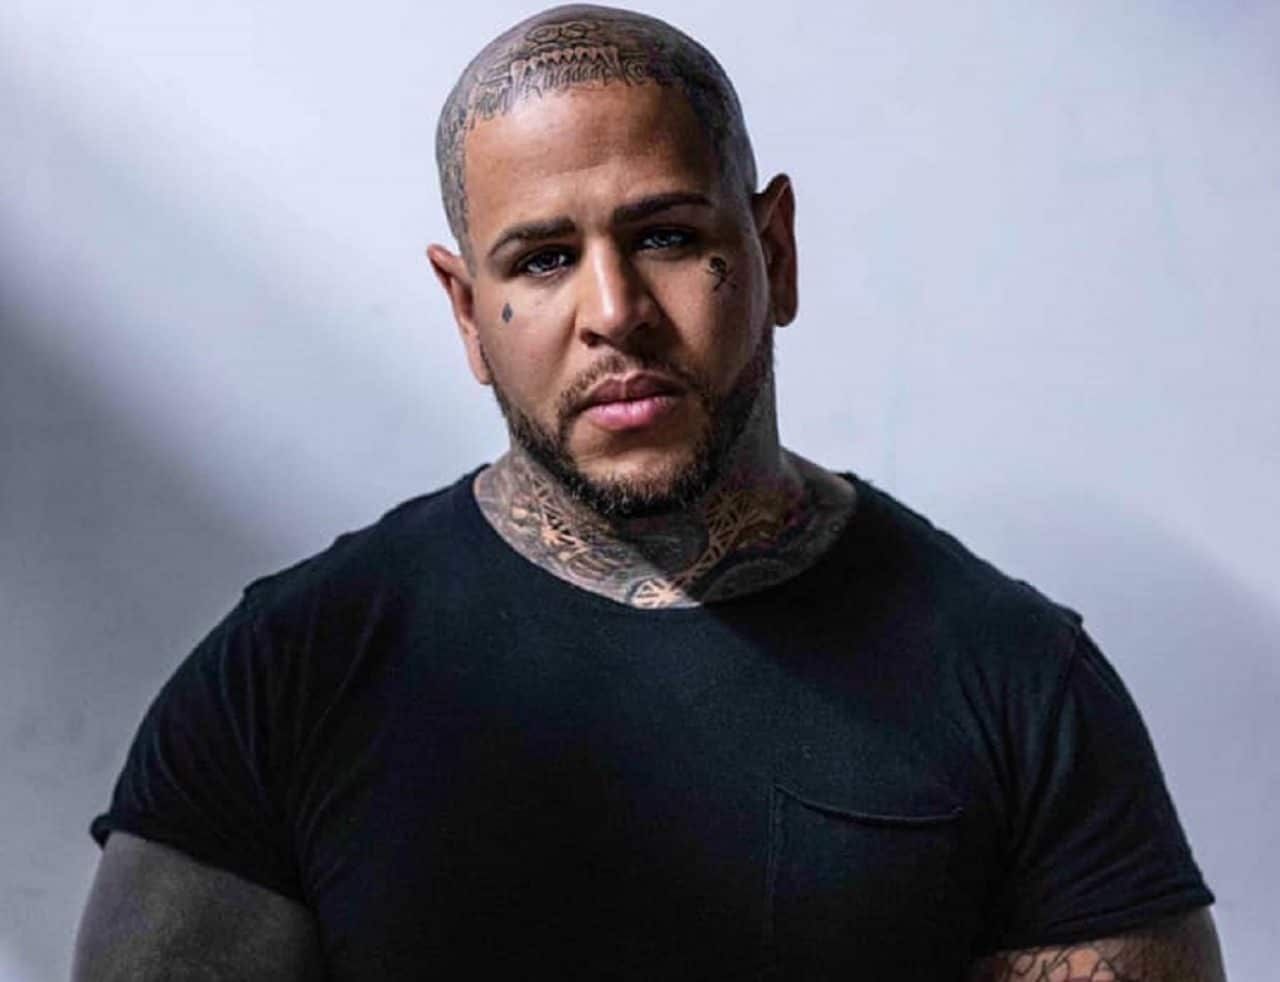 Ex-BAD WOLVES Singer TOMMY VEXT Being Sued By Better Noise Music For Copyright Infringement